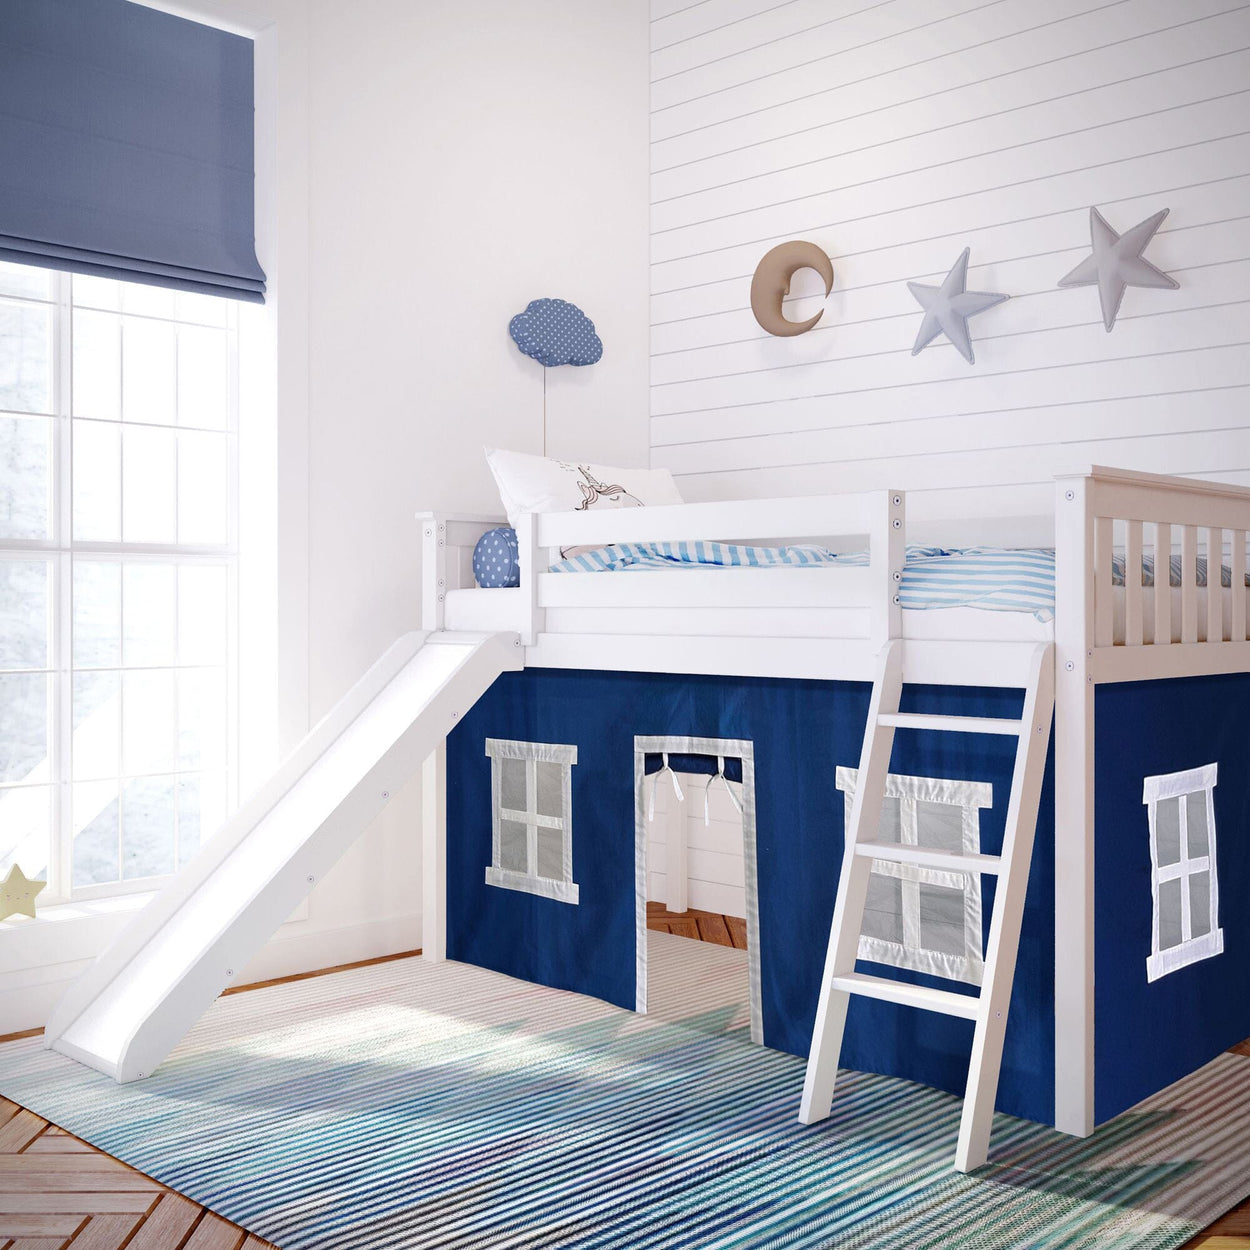 -180213002022 : Loft Beds Twin Low Loft with Slide and Blue Curtains, White